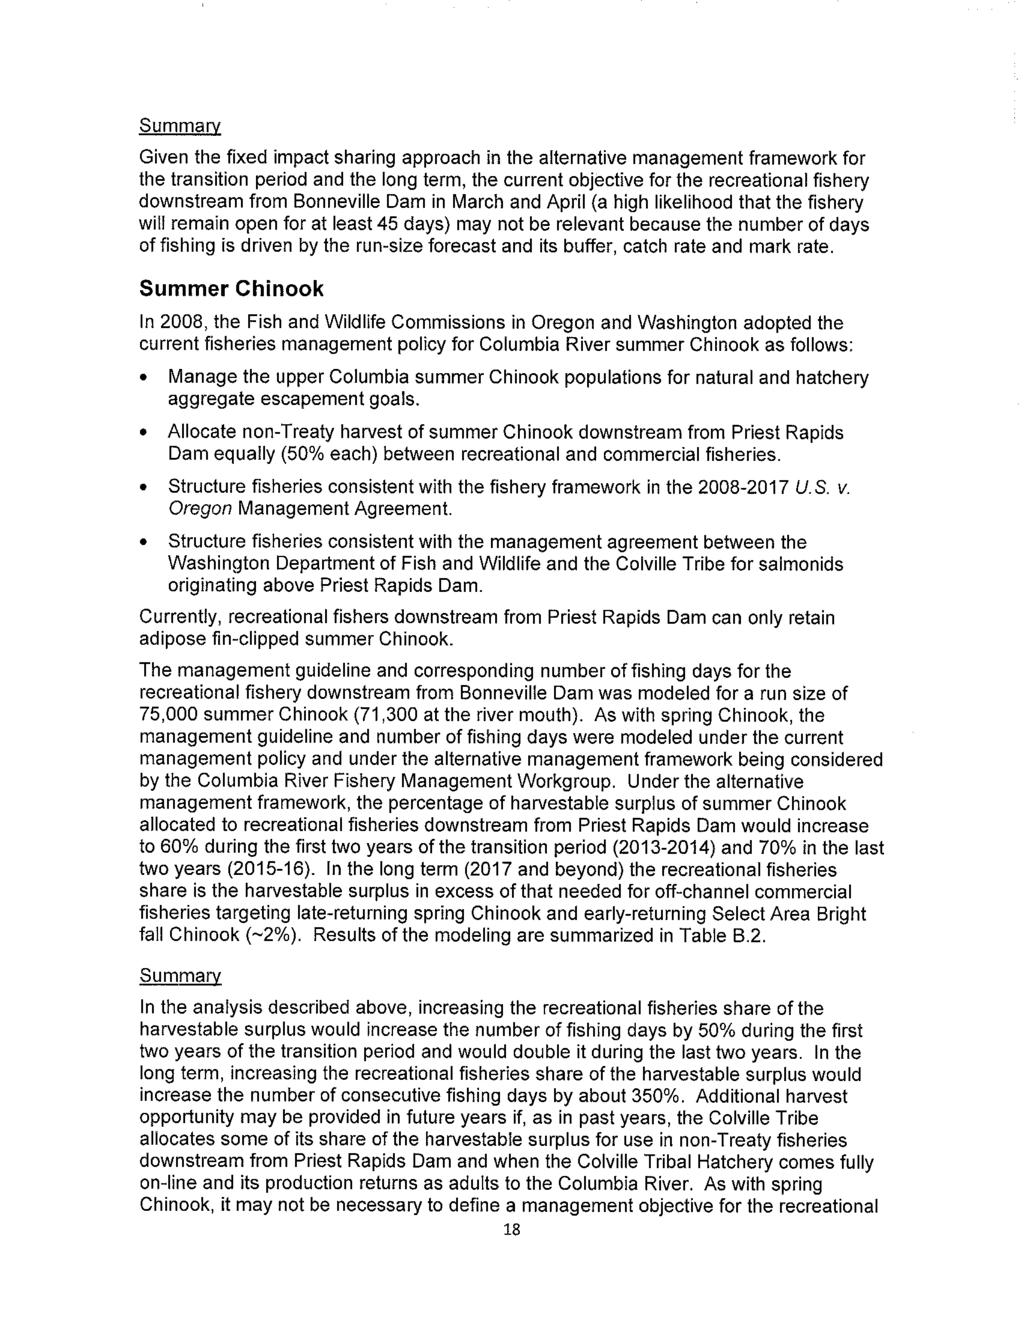 Page 18 of 40 Summary Given the fixed impact sharing approach in the alternative management framework for the transition period and the long term, the current objective for the recreational fishery